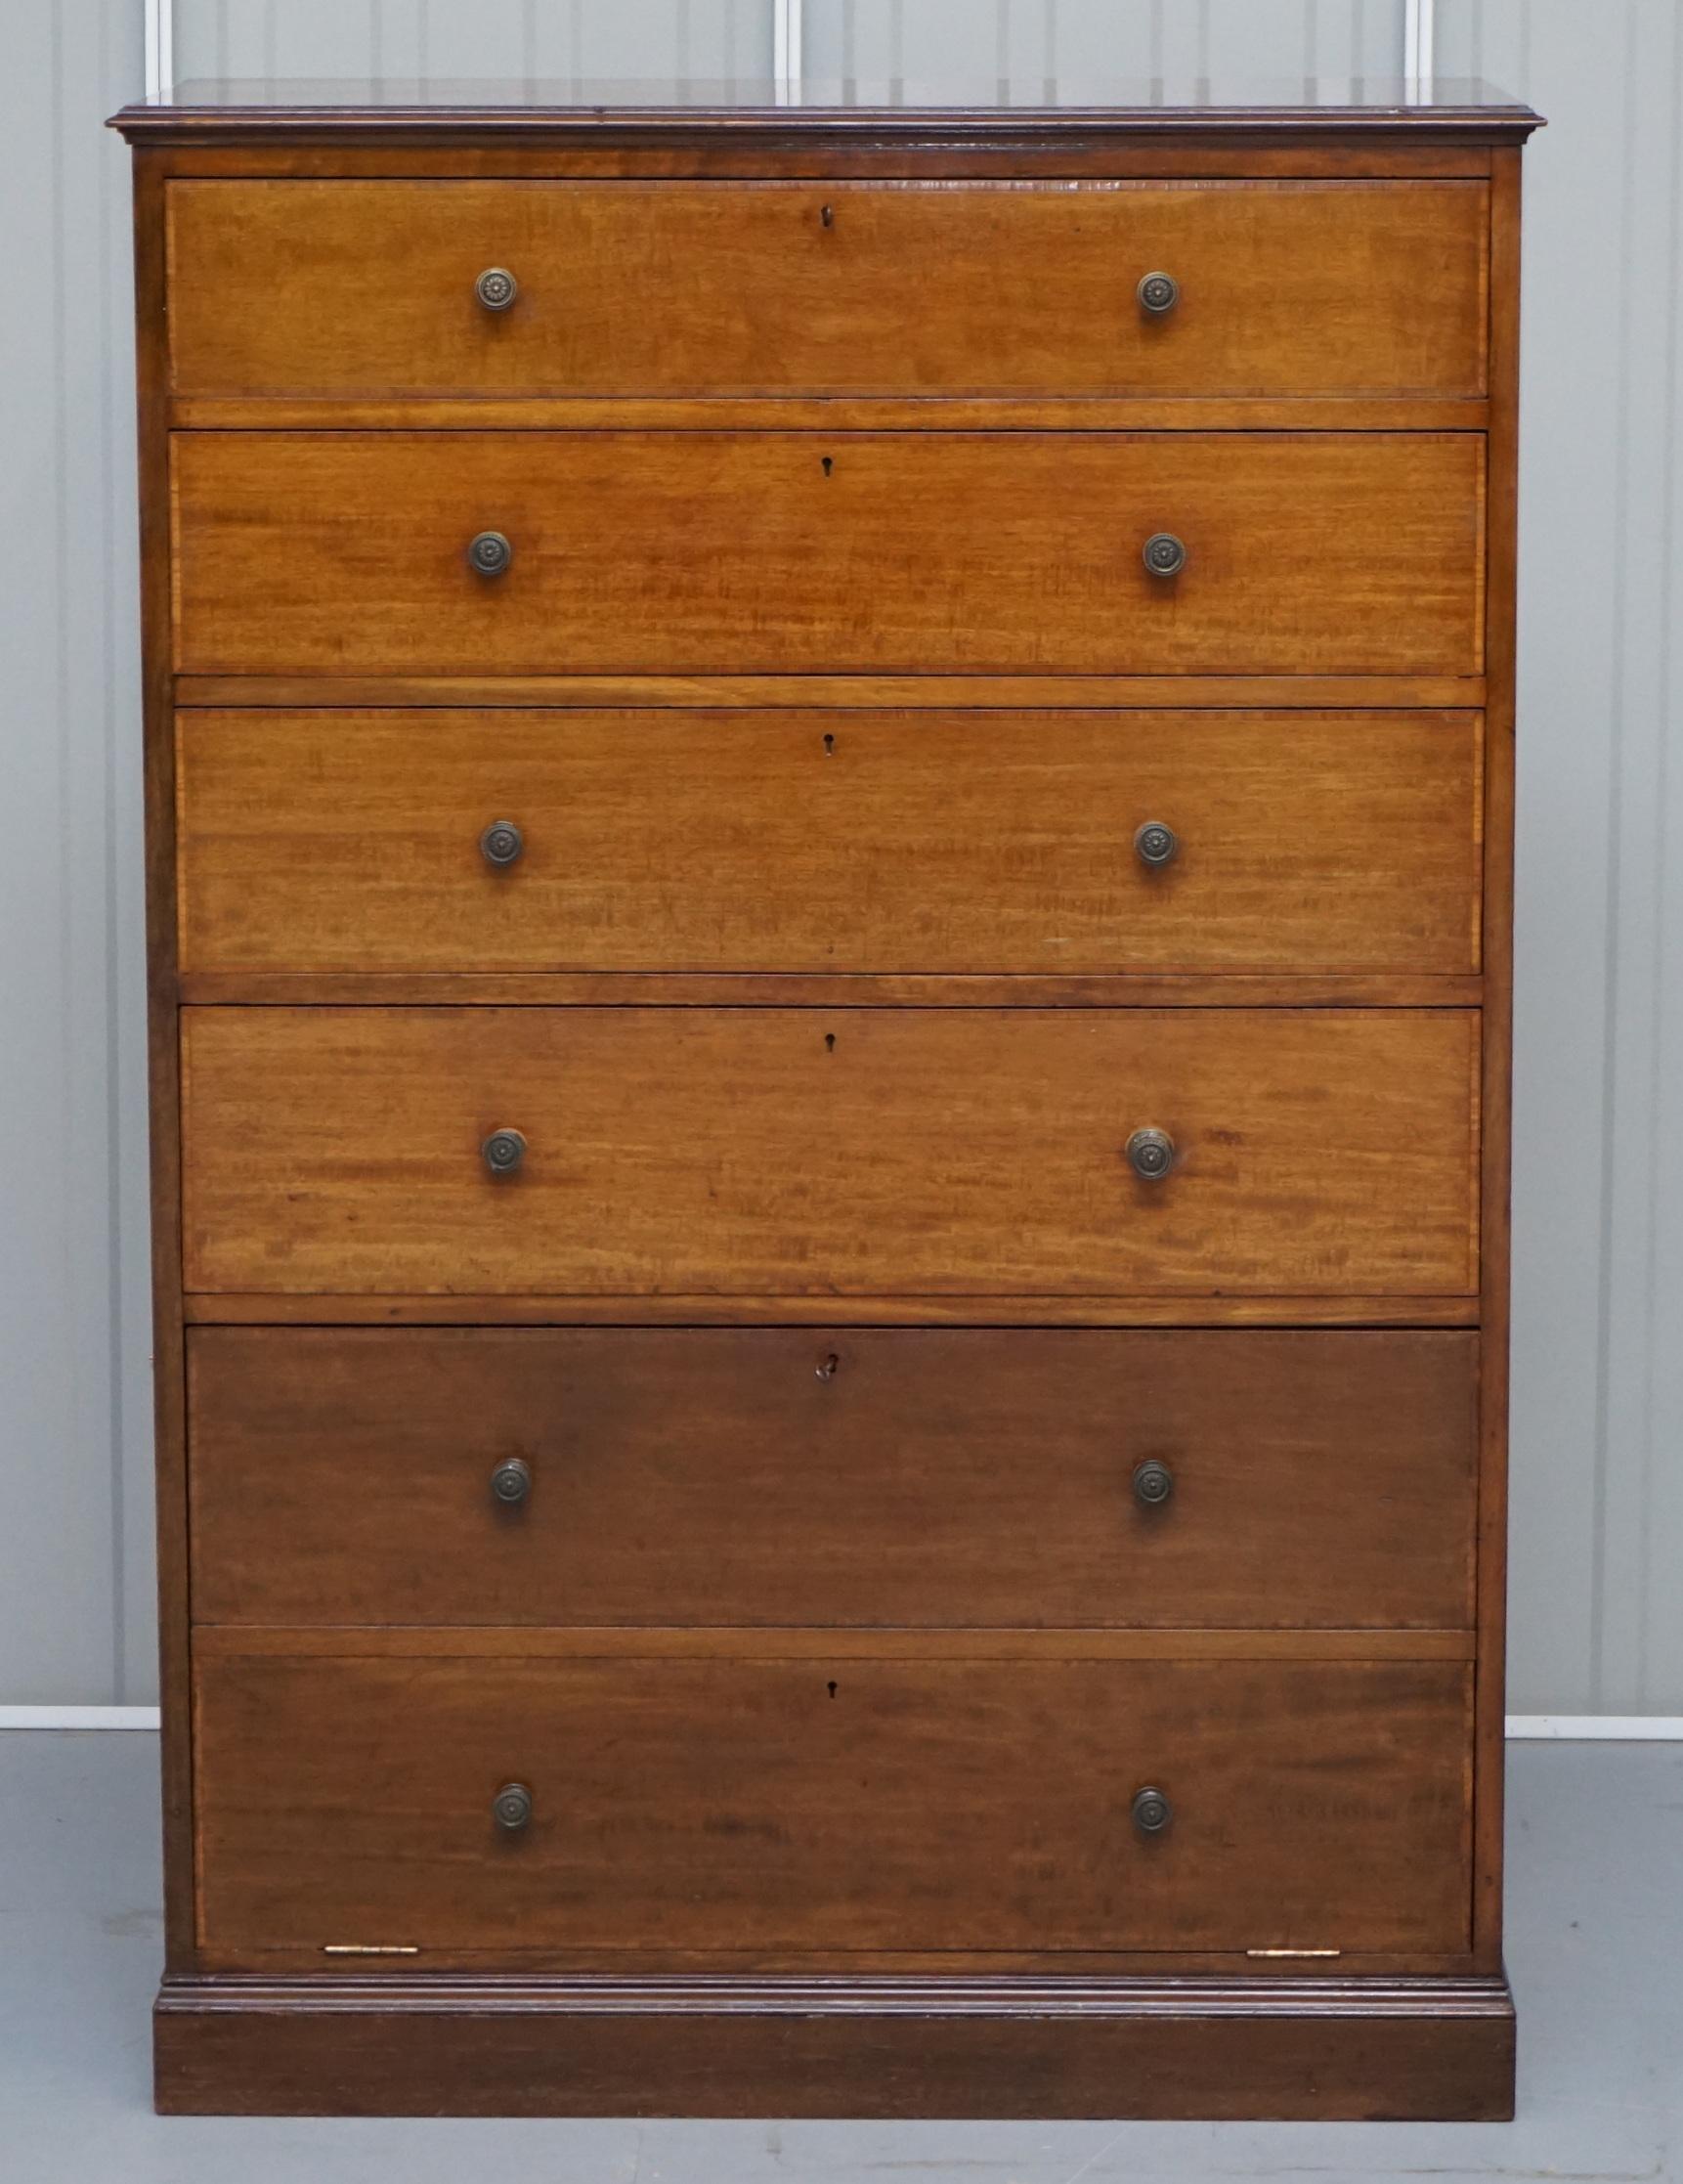 We are delighted to offer for auction this stunning extremely rare original early Victorian mahogany Howard & Son’s Berners street large chest of drawers with hidden silver cupboard

This is a very interesting piece, you have four large drawers to